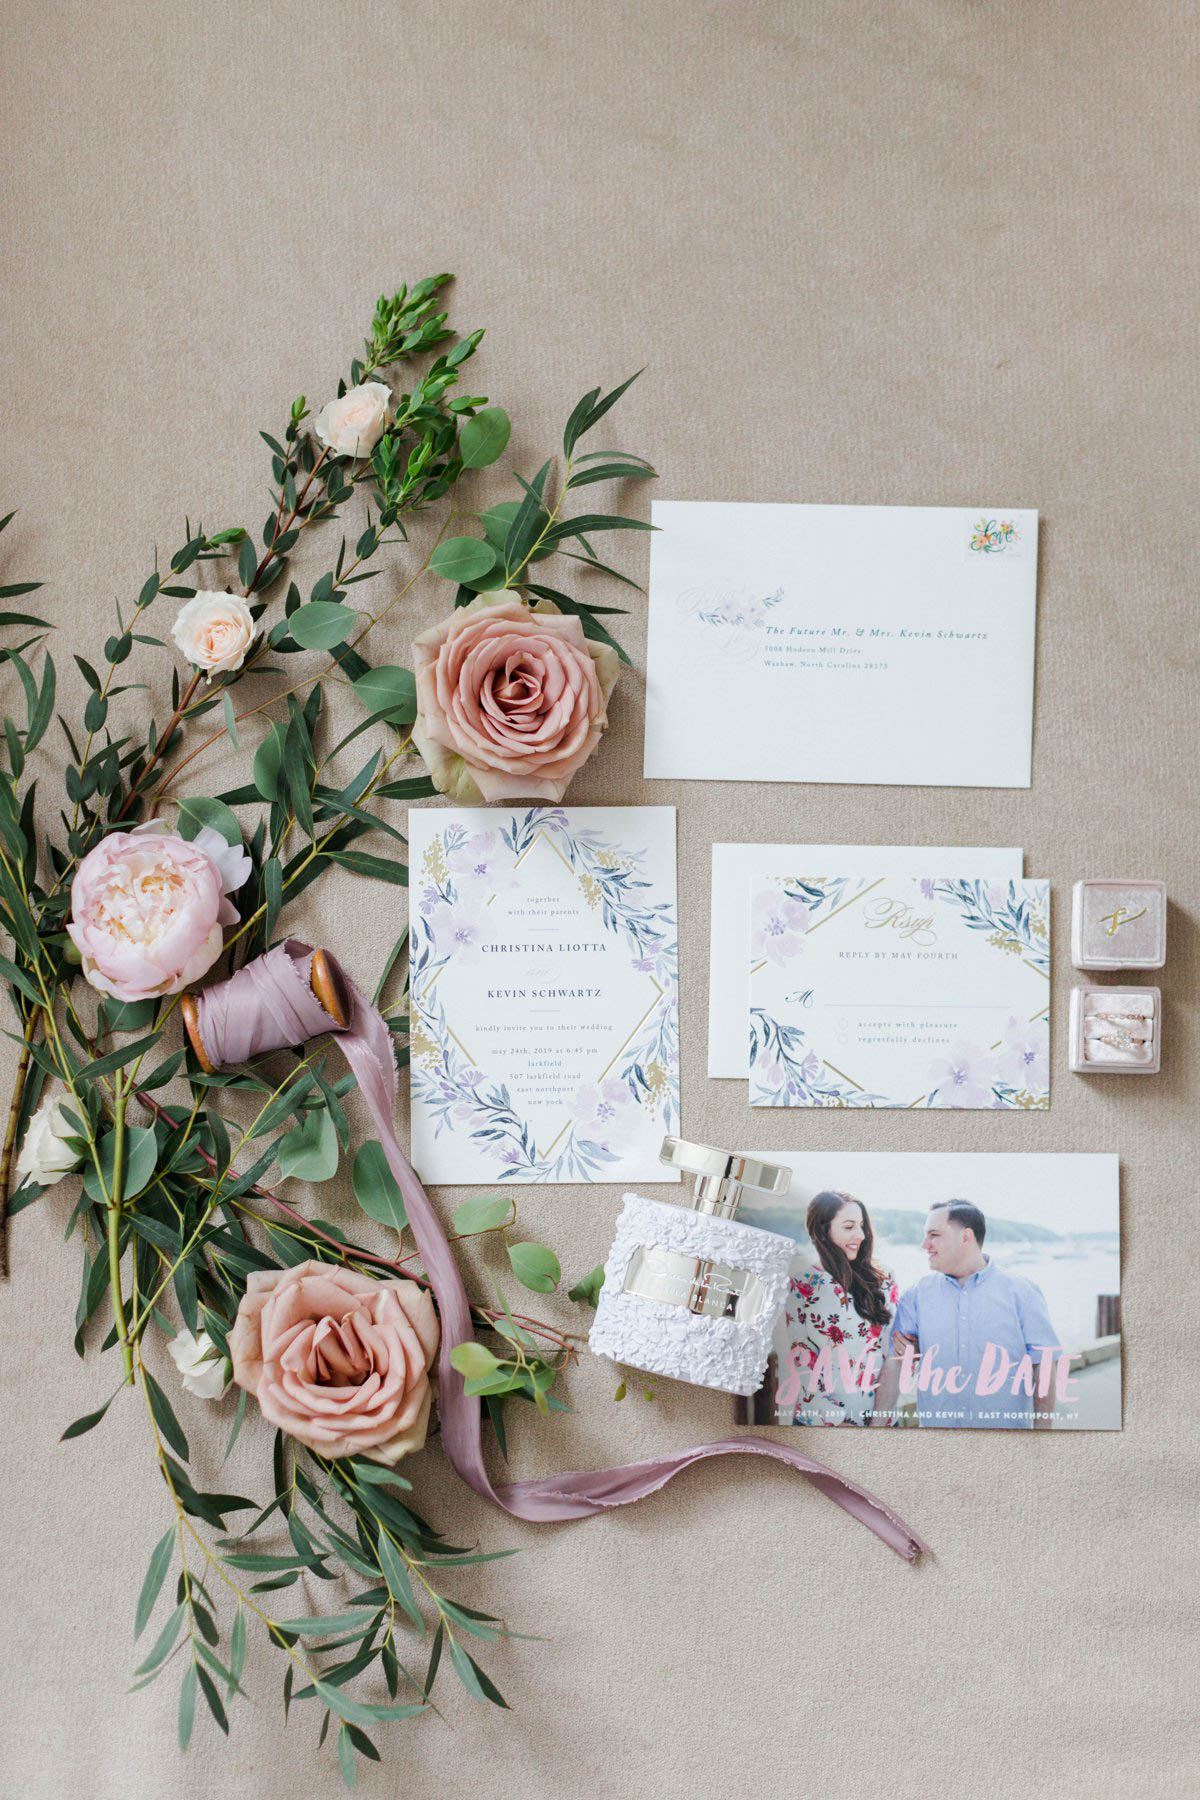 Wedding invitation suite surrounded by florals